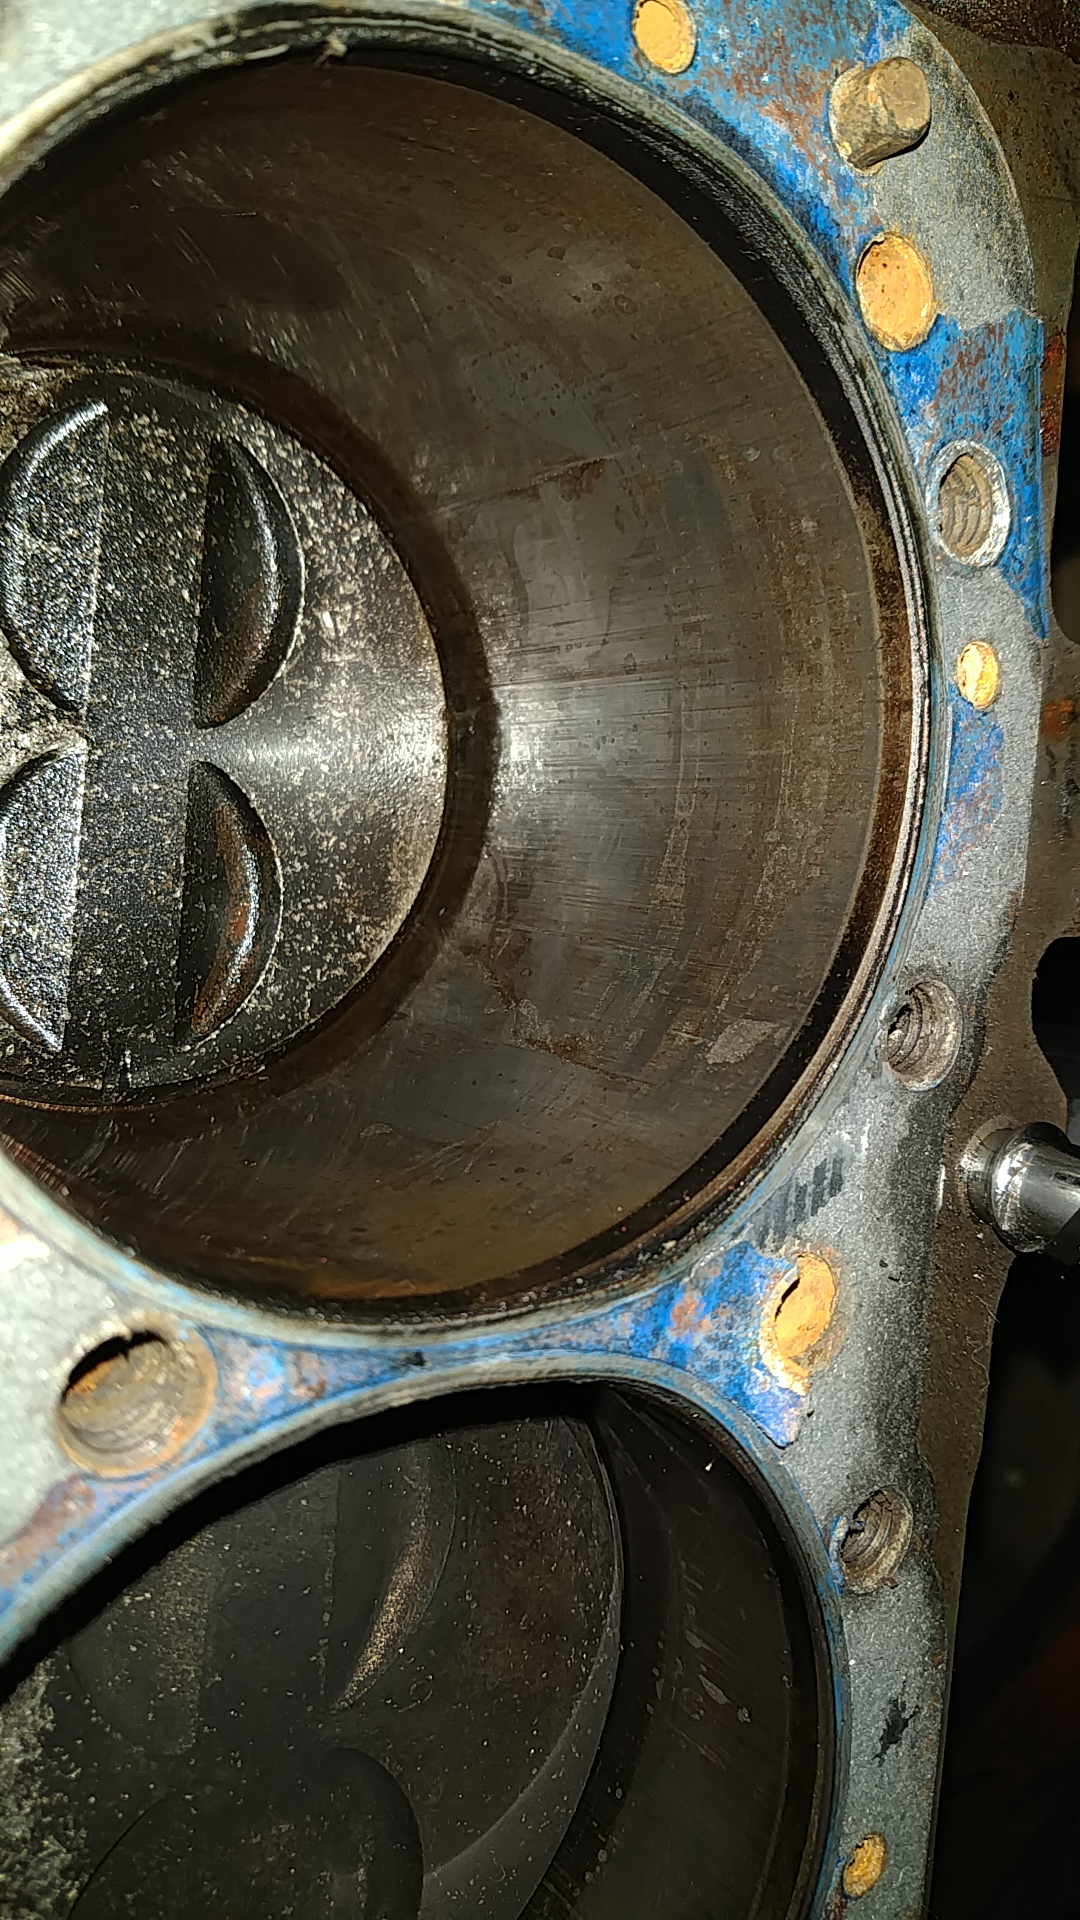 What can cause piston and head damage like this? - Third Generation F